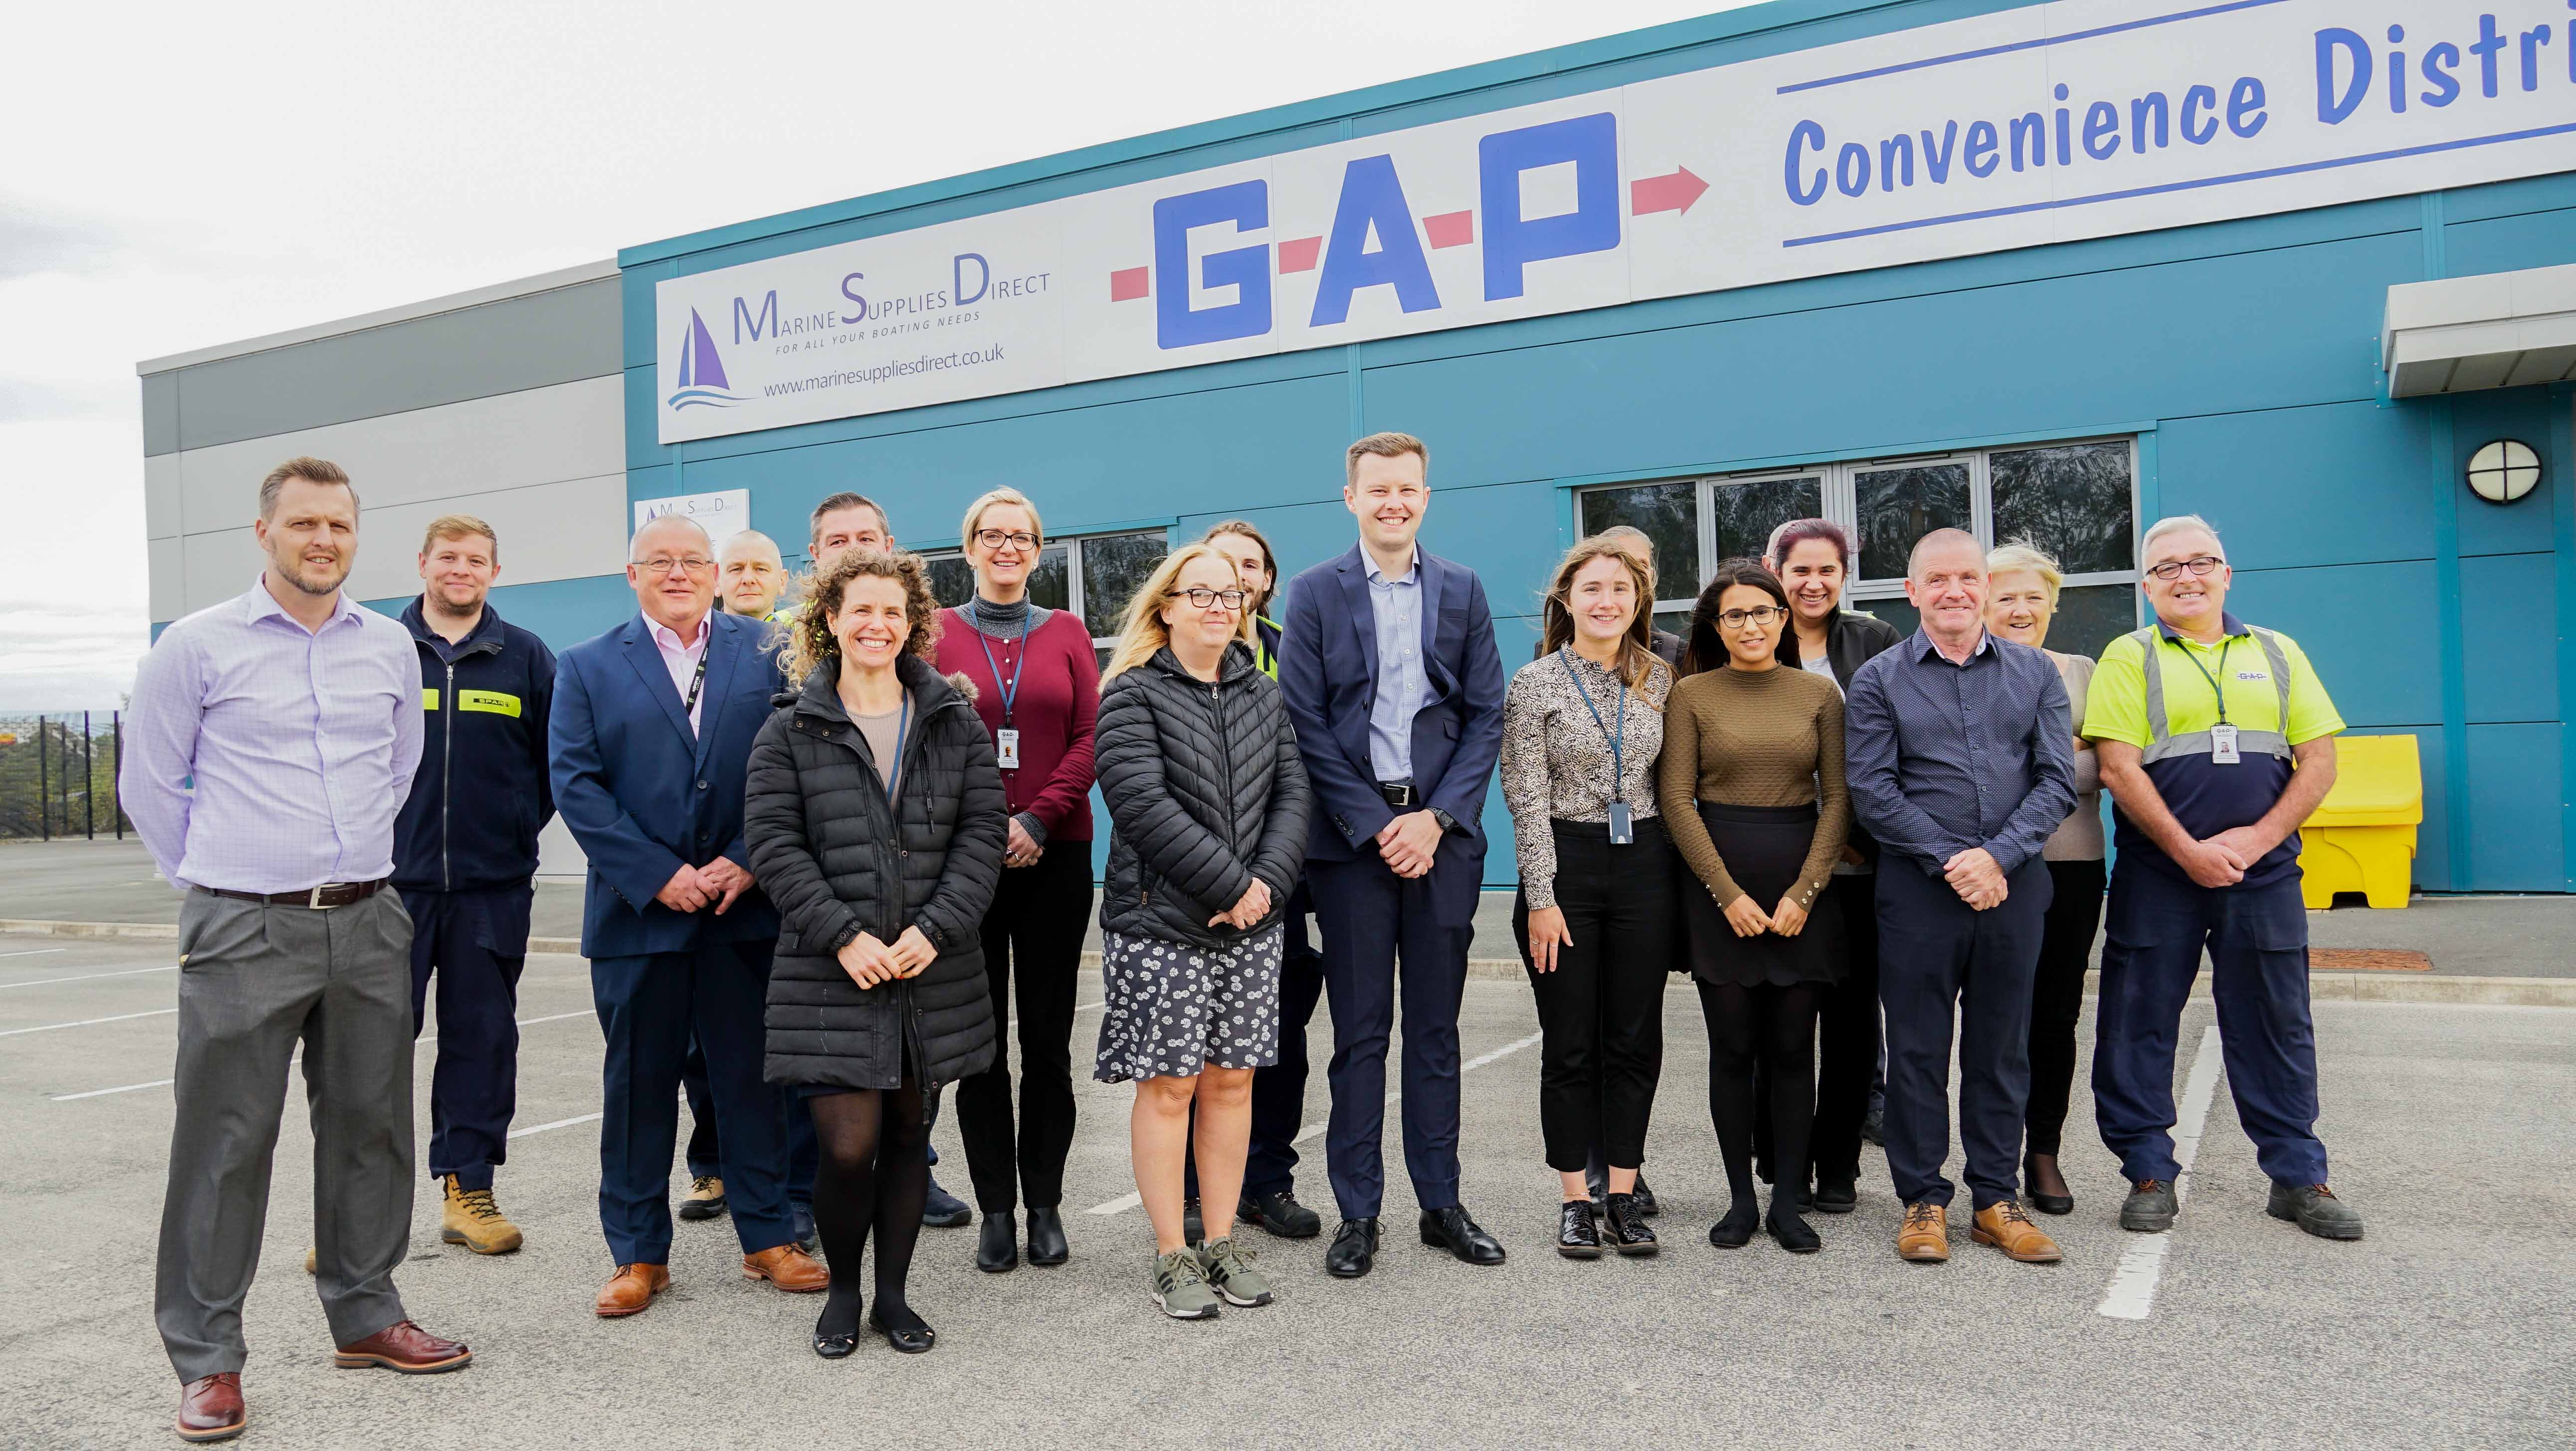 Back-to-back BP Supply Chain Award wins for Lancashire company G.A.P Convenience Distribution Ltd